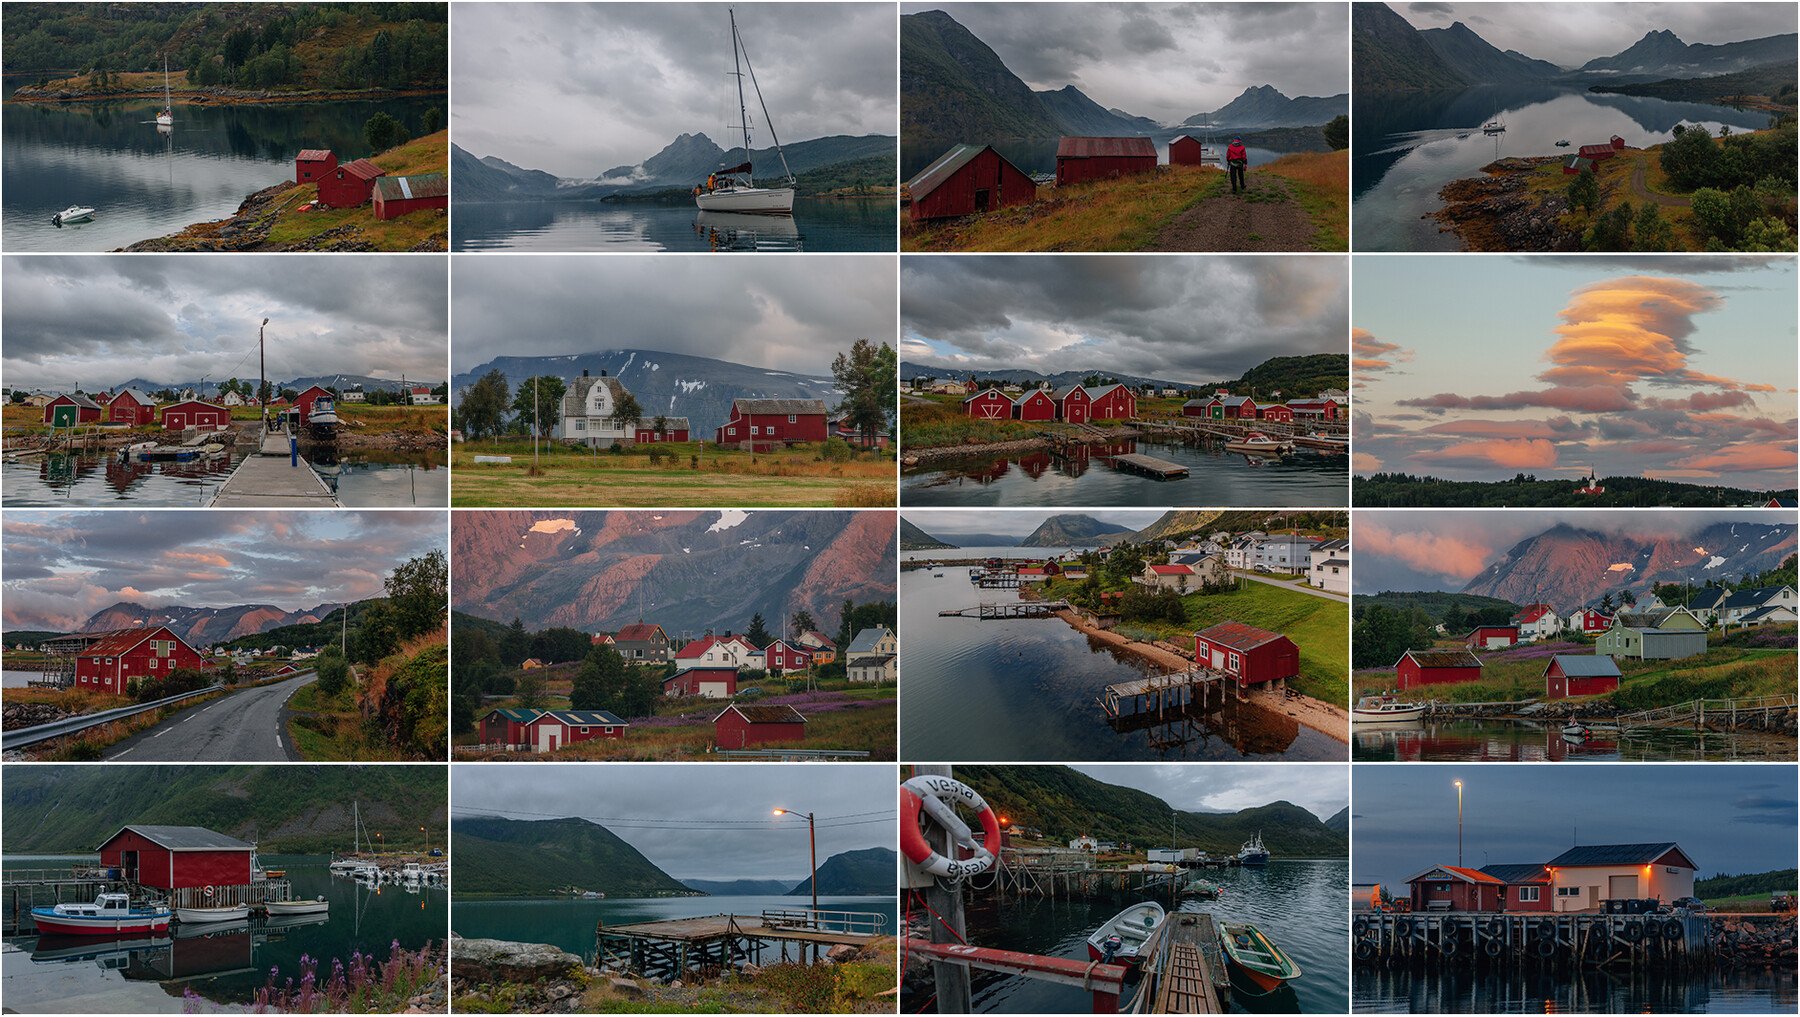 760+ Nordic Landscape Reference Pictures